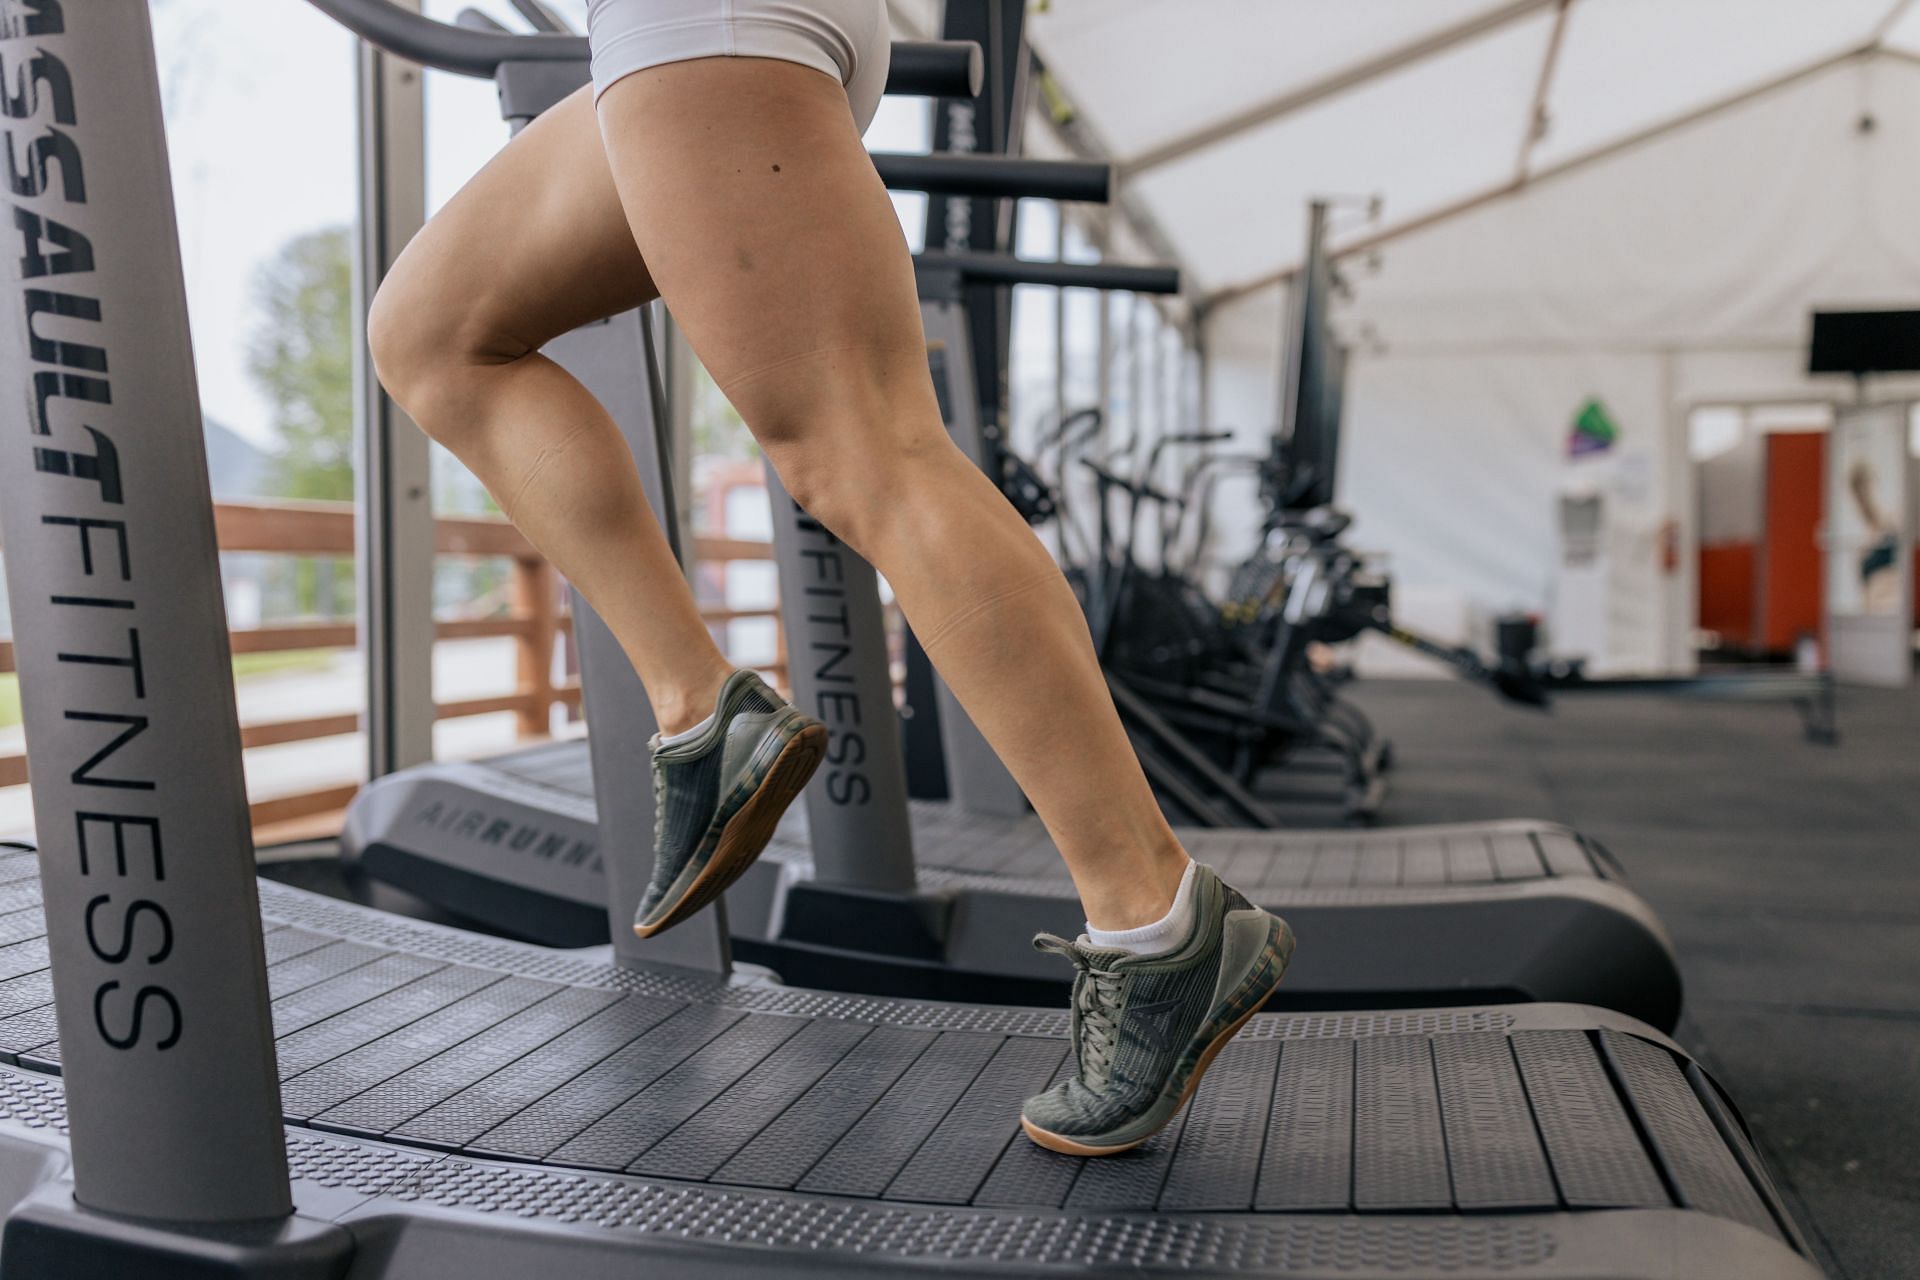 Treadmill incline workouts can provide you with a new challenge if you are getting bored of running flat (Image via Pexels @Anastasia Shuraeva)